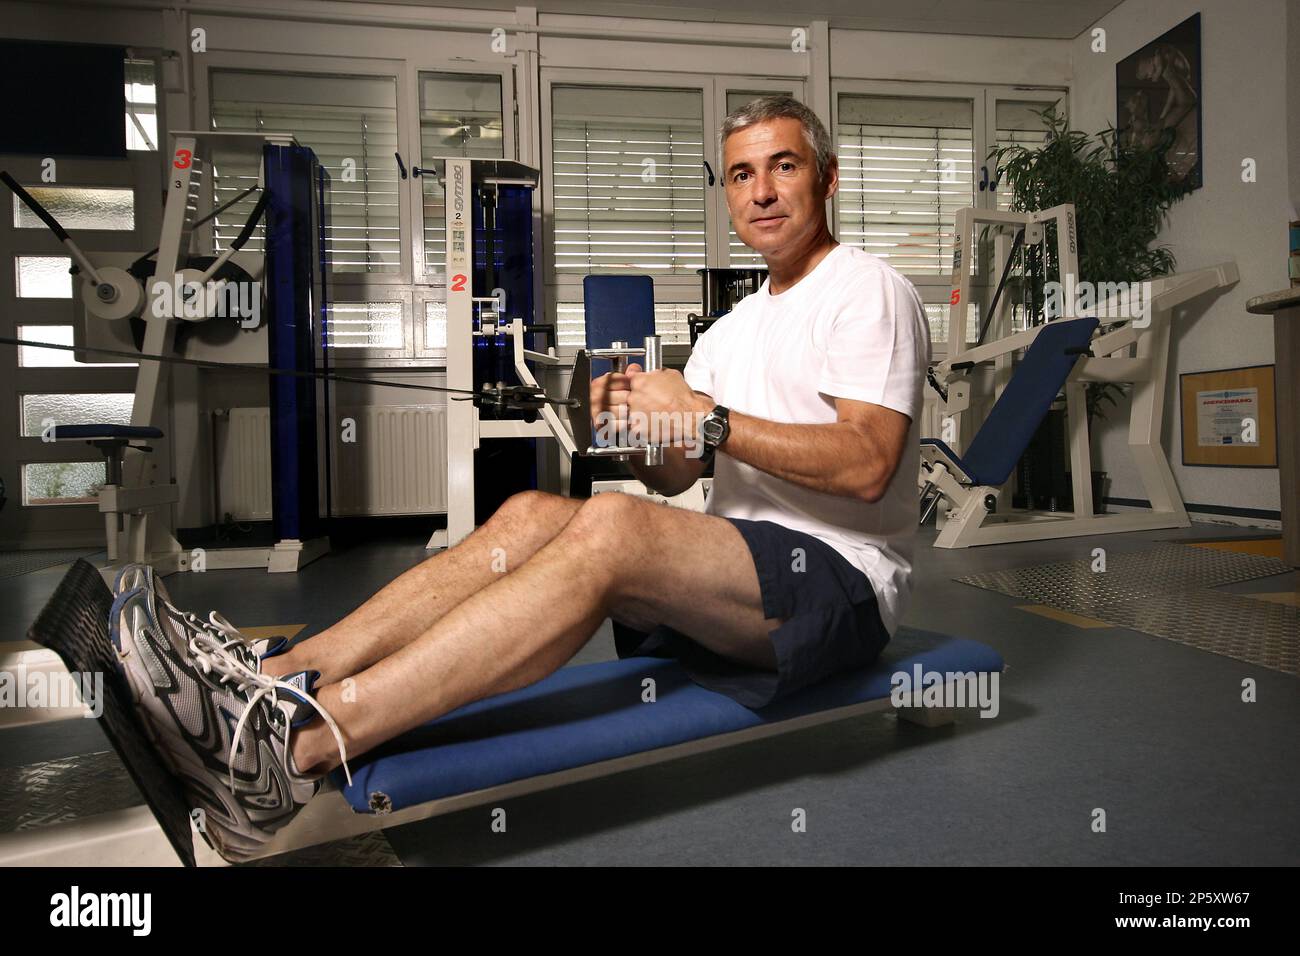 elderly man at a rowing machine in the gym Stock Photo